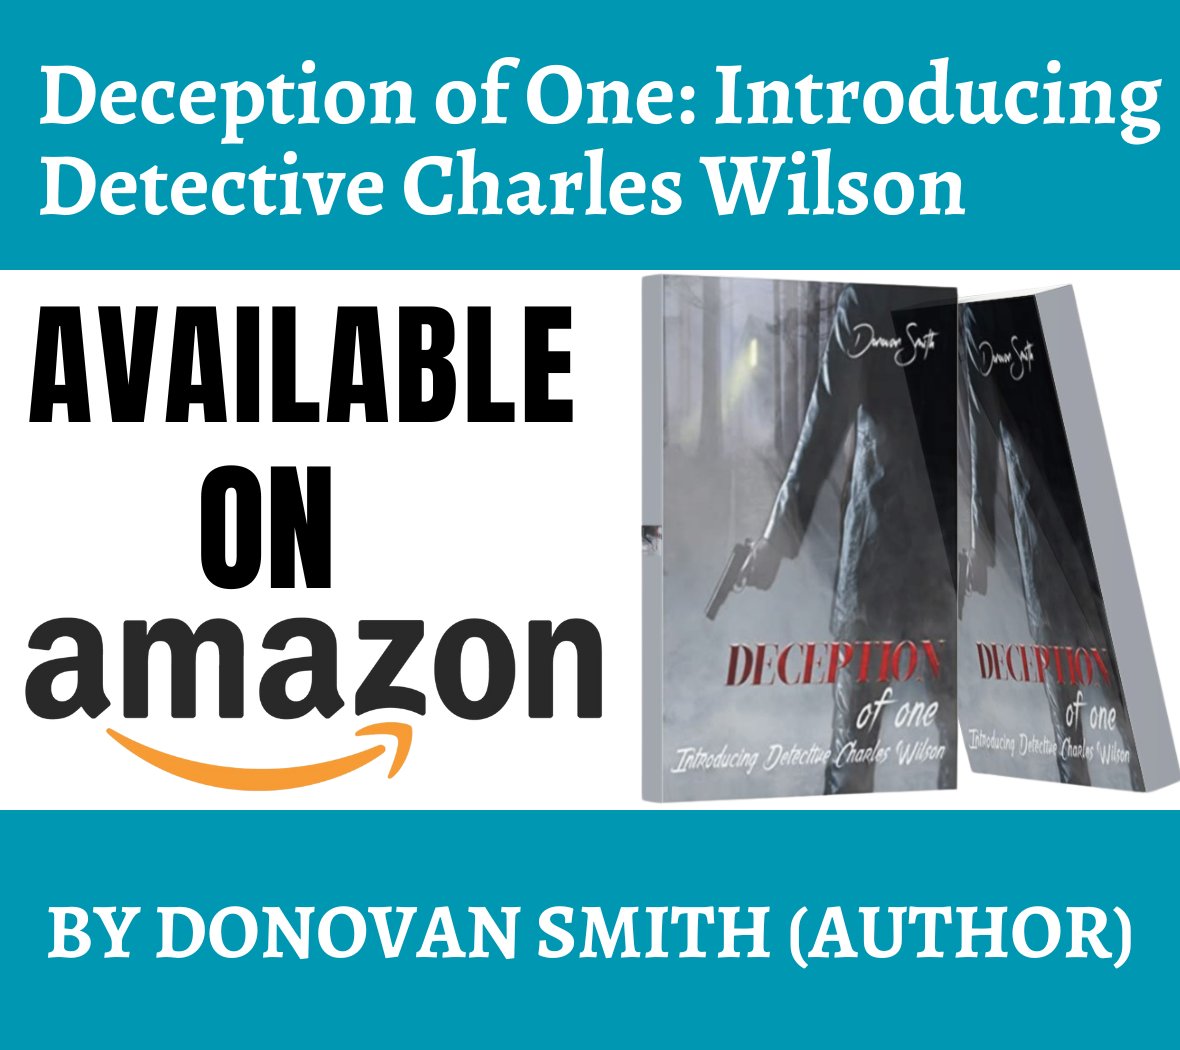 Deception of One: Introducing Detective Charles Wilson 

Author Name: Donovan Smith
Amazon Book Link: cutt.ly/D8eW325
Book Language: English
.
.
#book #bookclub #bookreaders #booklover #army #donovansmith
#amazonbook #investigate #WarrantOfficer #armyofficer